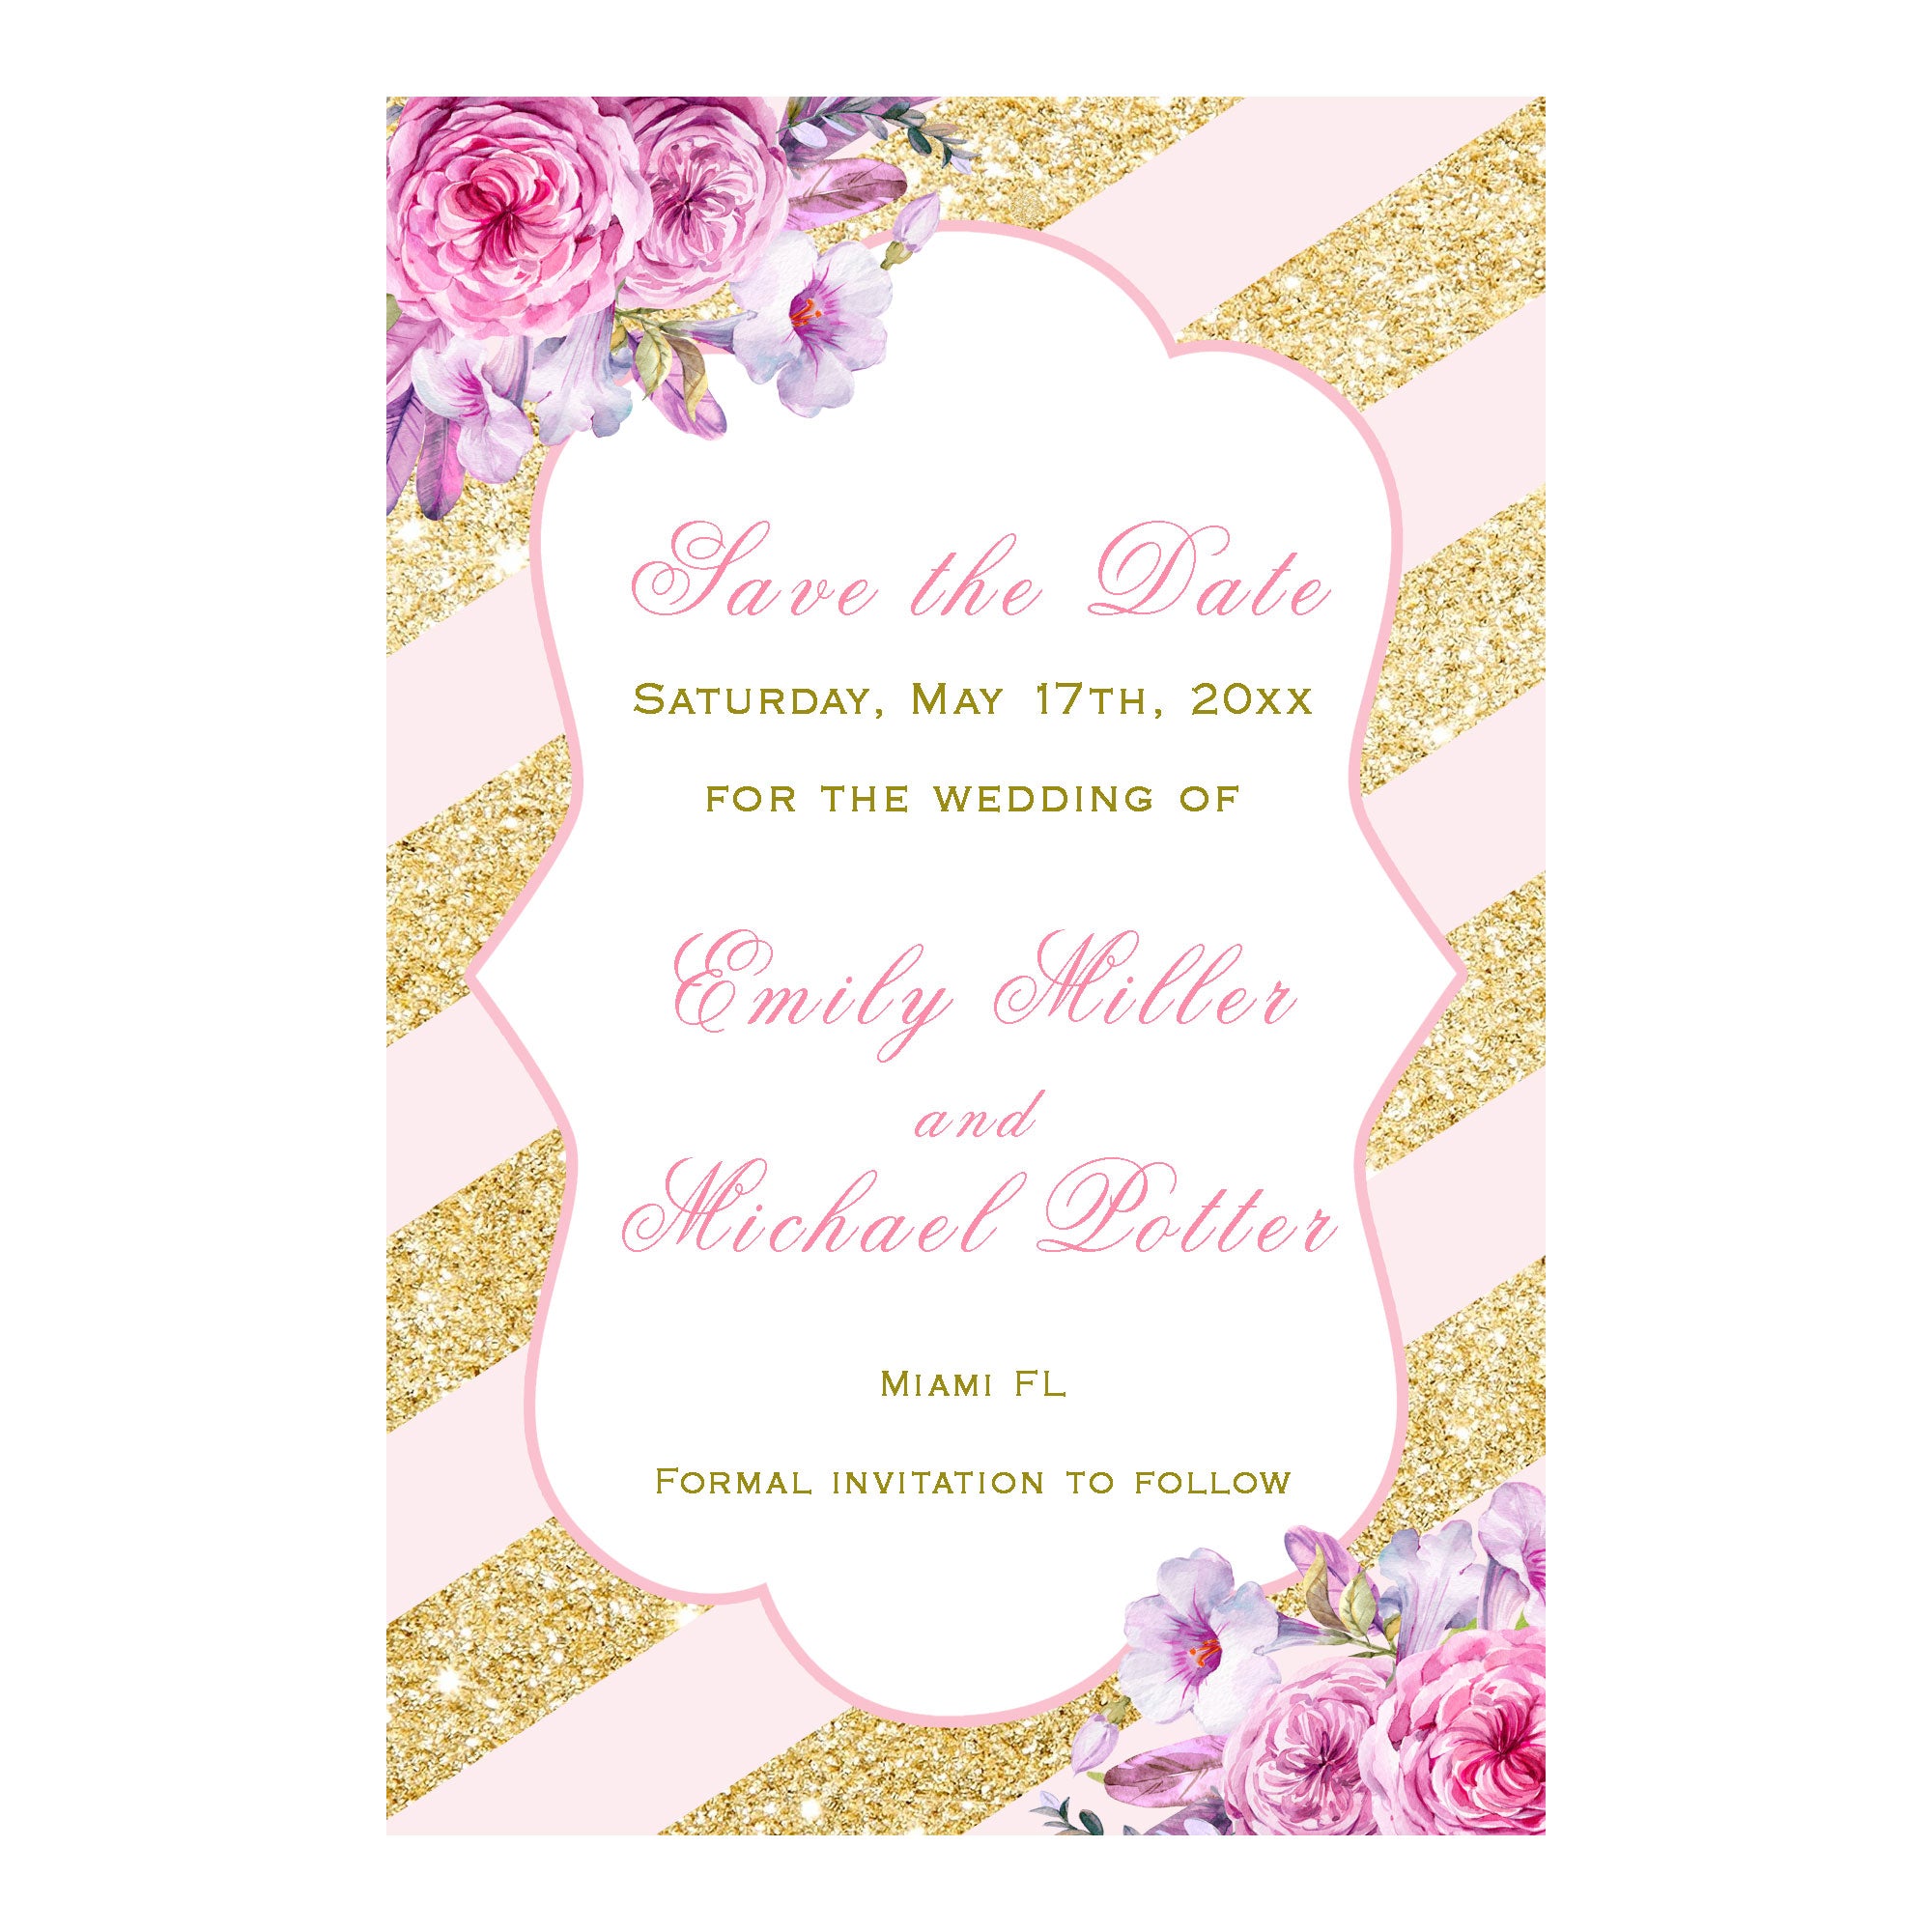 Save the date cards blush pink gold floral wedding printable